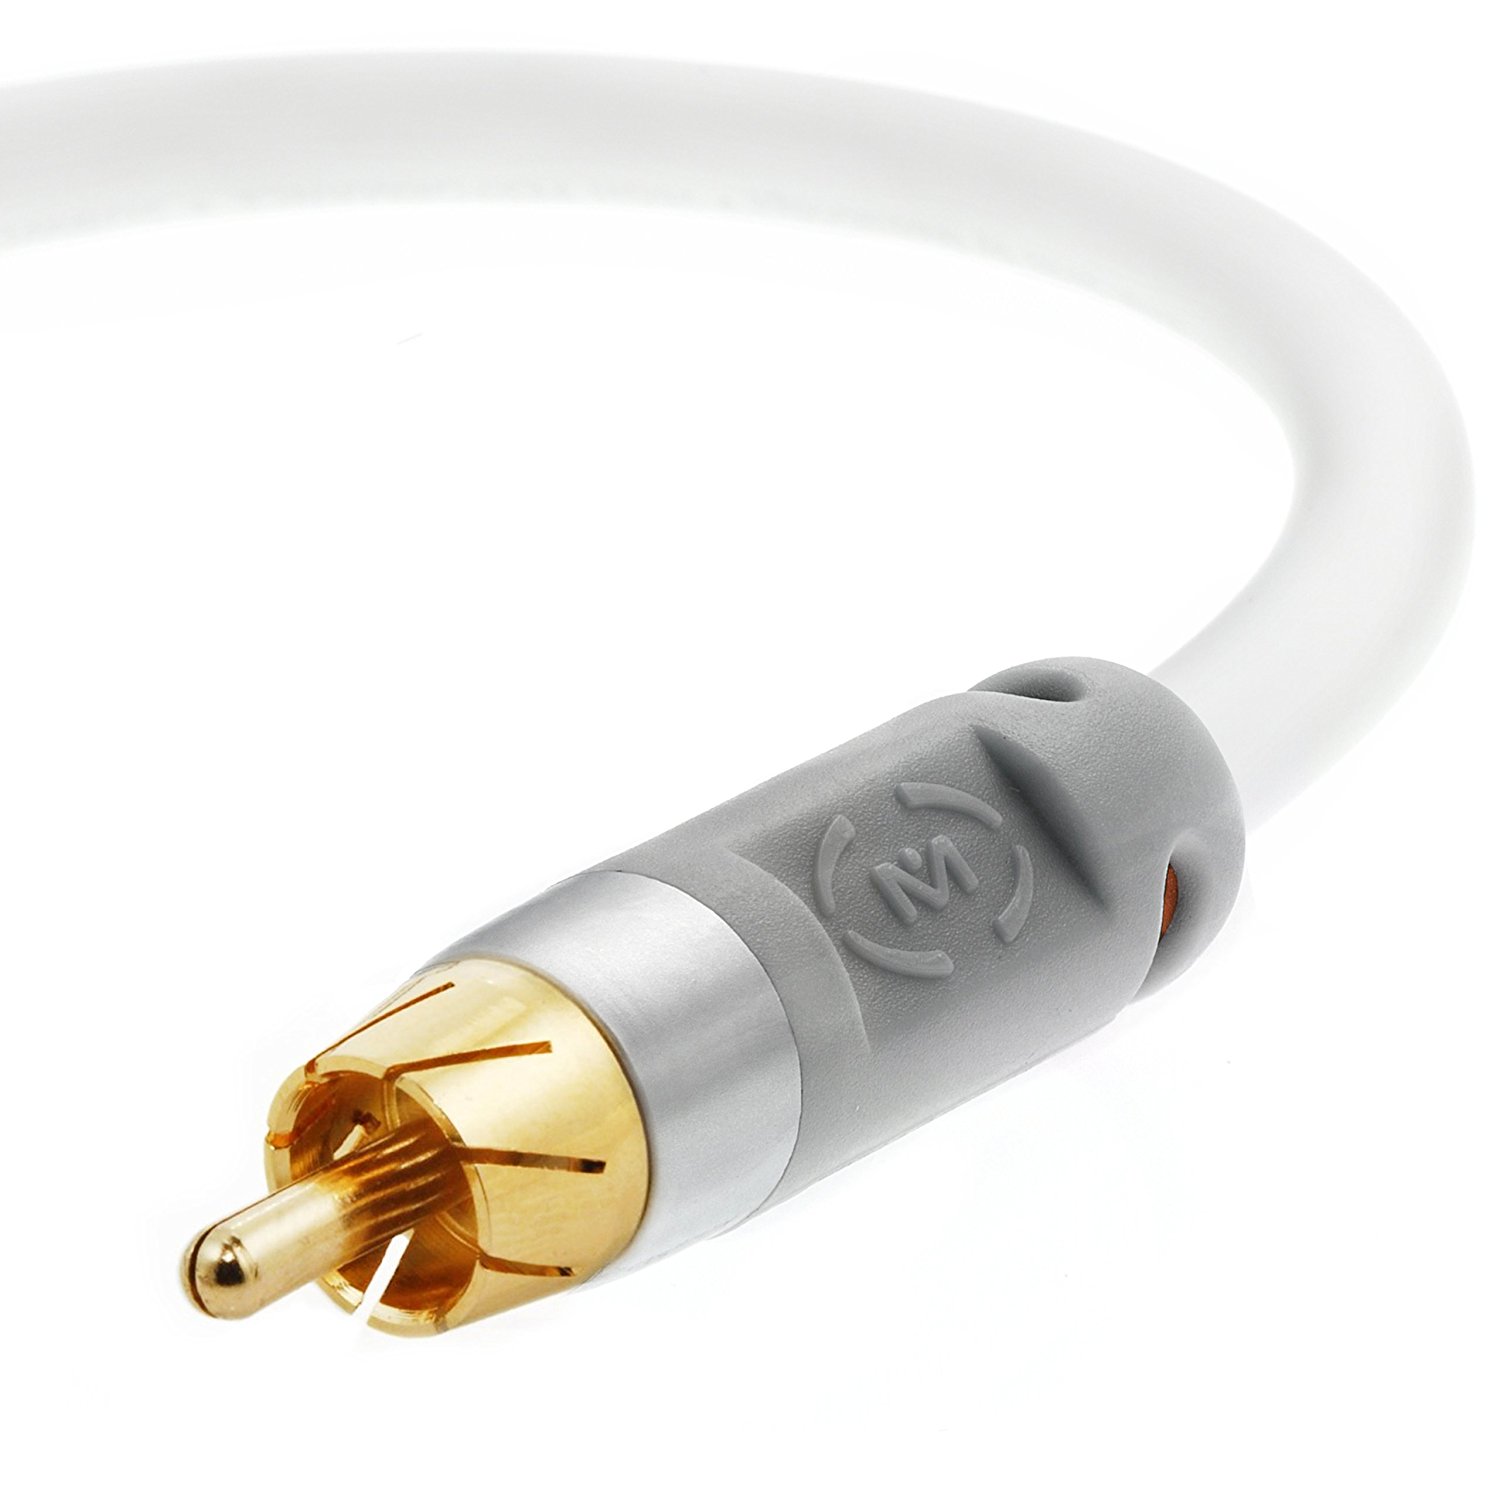 Mediabridge ULTRA Series Digital Audio Coaxial Cable (4 Feet) - Dual Shielded with RCA to RCA Gold-Plated Connectors - White - (Part# CJ04-6WR-G2 ) - image 1 of 4